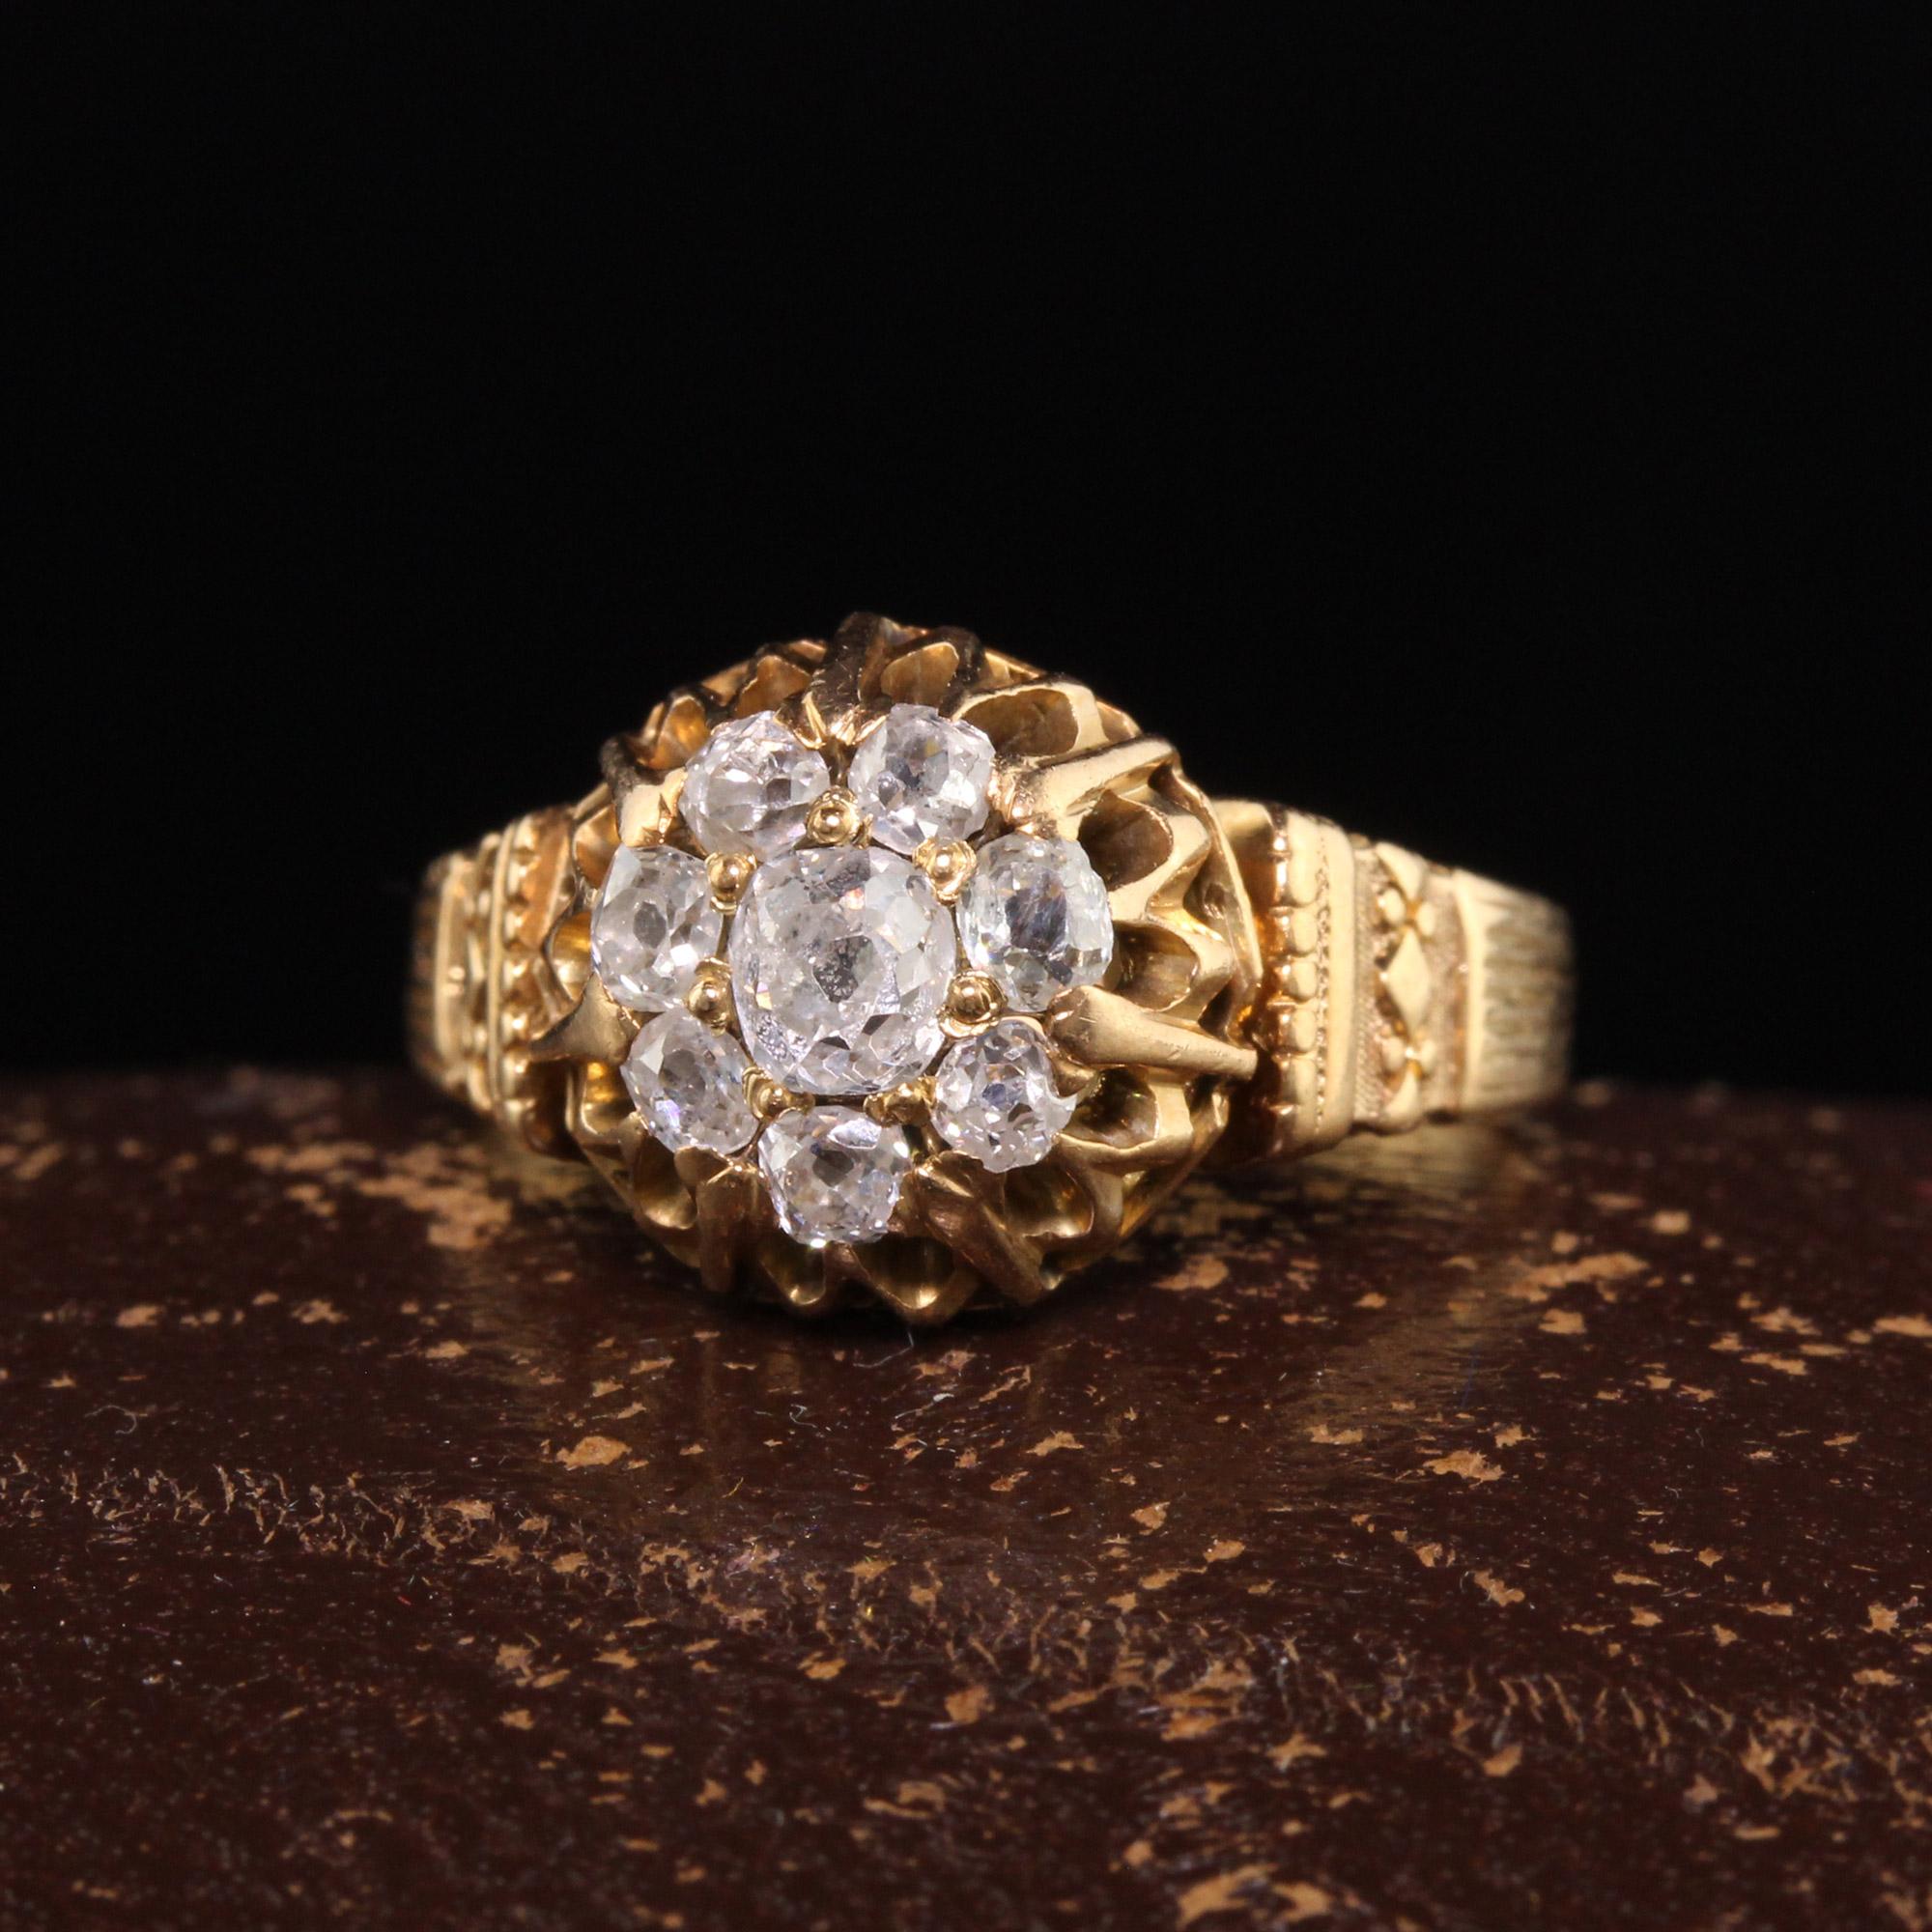 Beautiful Antique Victorian 18K Yellow Gold Old Mine Cut Diamond Cluster Ring. This beautiful Victorian ring is crafted in 18K yellow gold and has old mine cut diamonds on the top of the ring.

Item #R1223

Metal: 18K Yellow Gold

Weight: 3.5